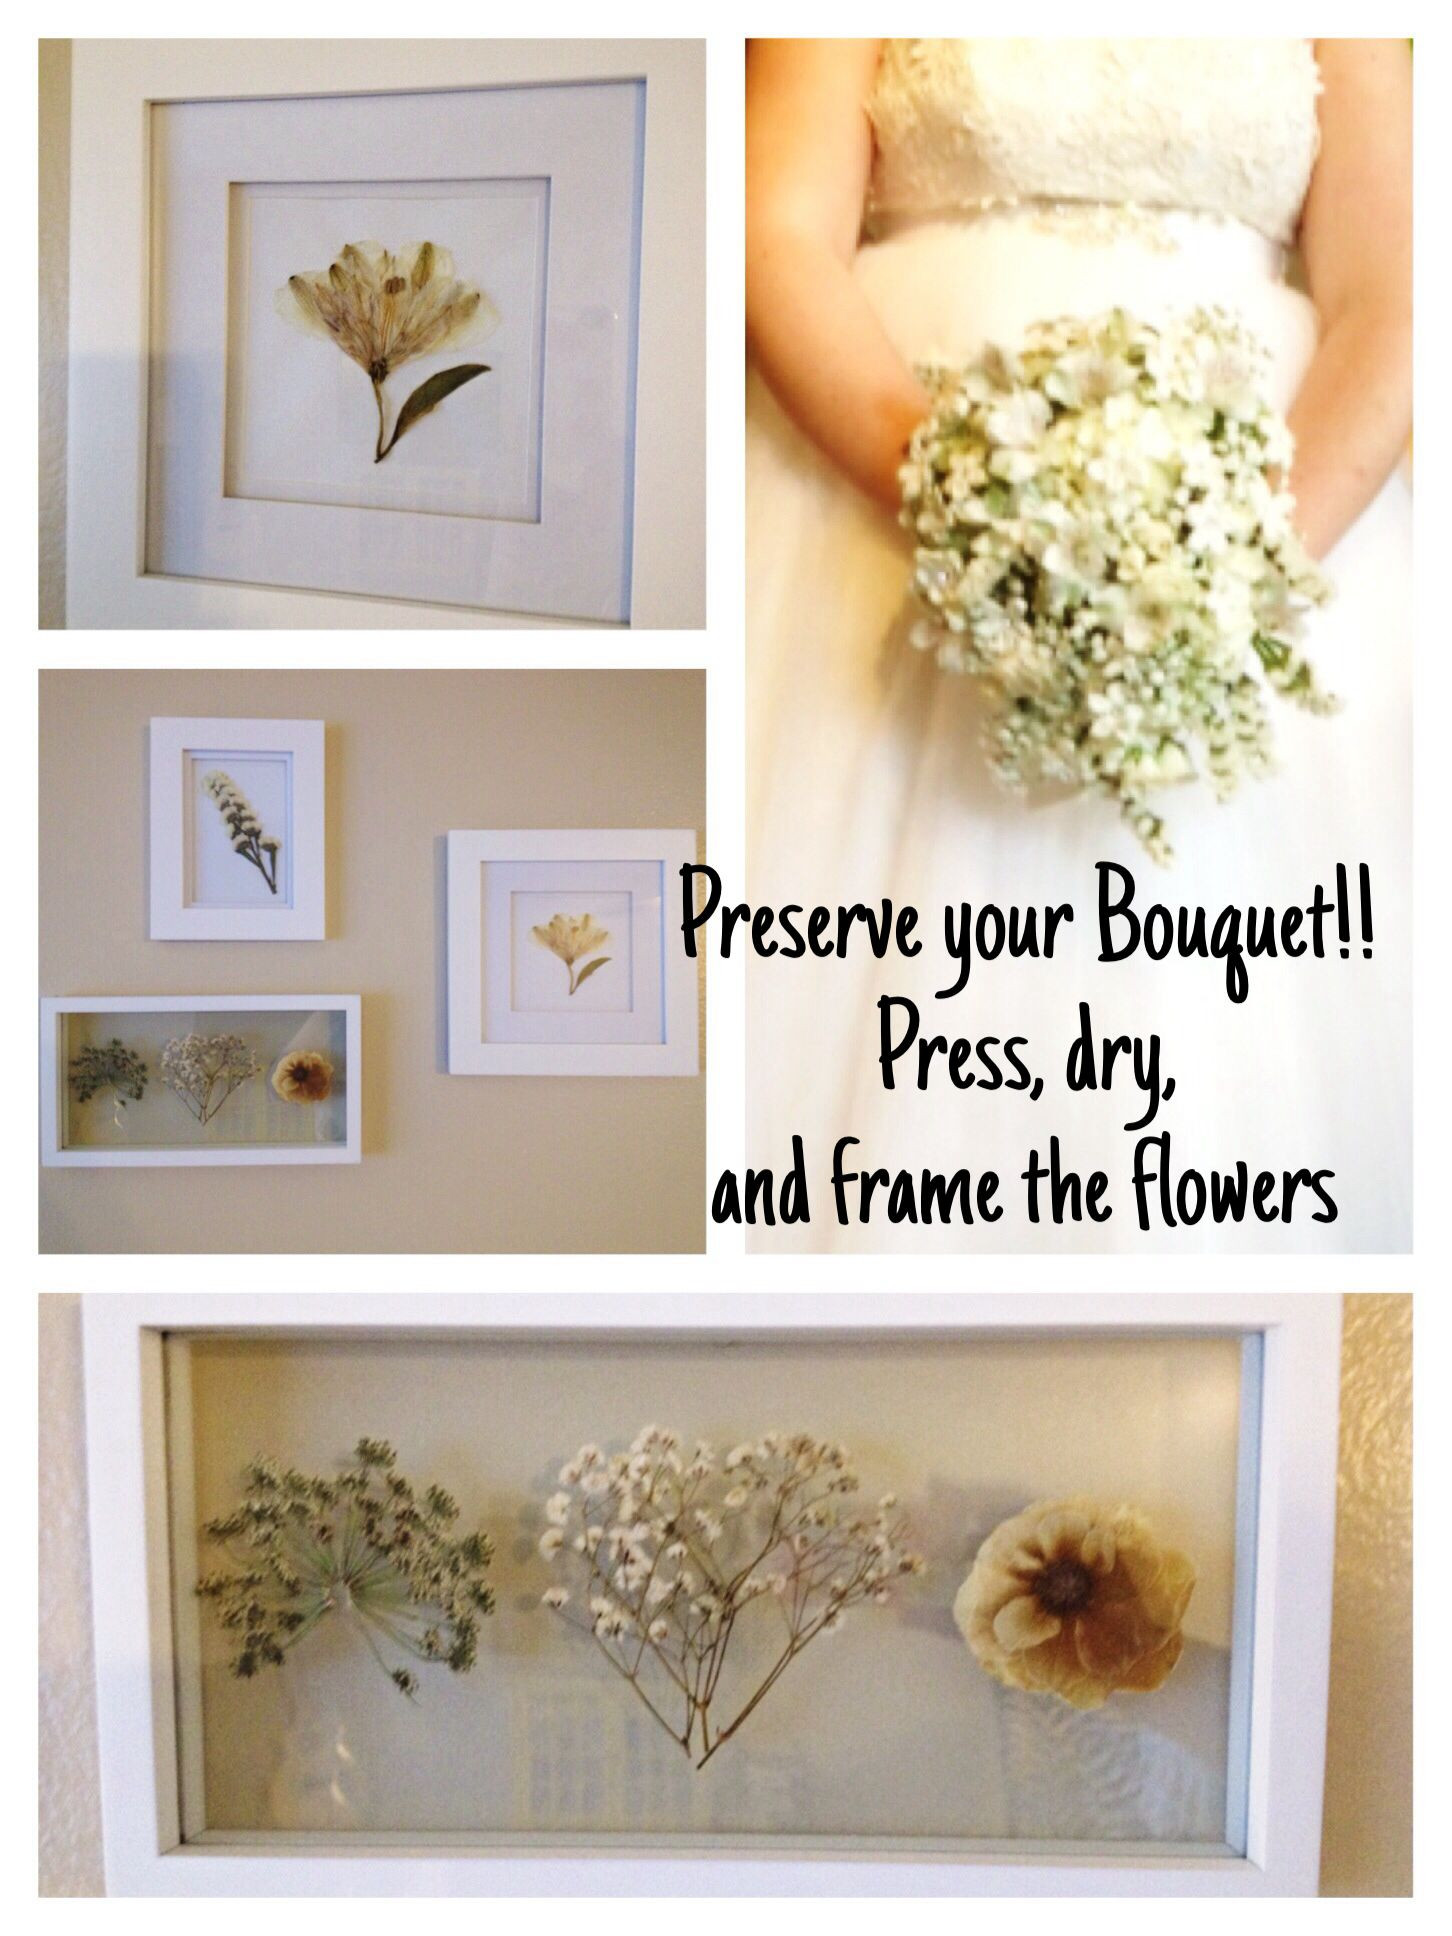 Preserving Wedding Bouquet DIY
 DIY Wedding Bouquet Preservation This is how I preserved